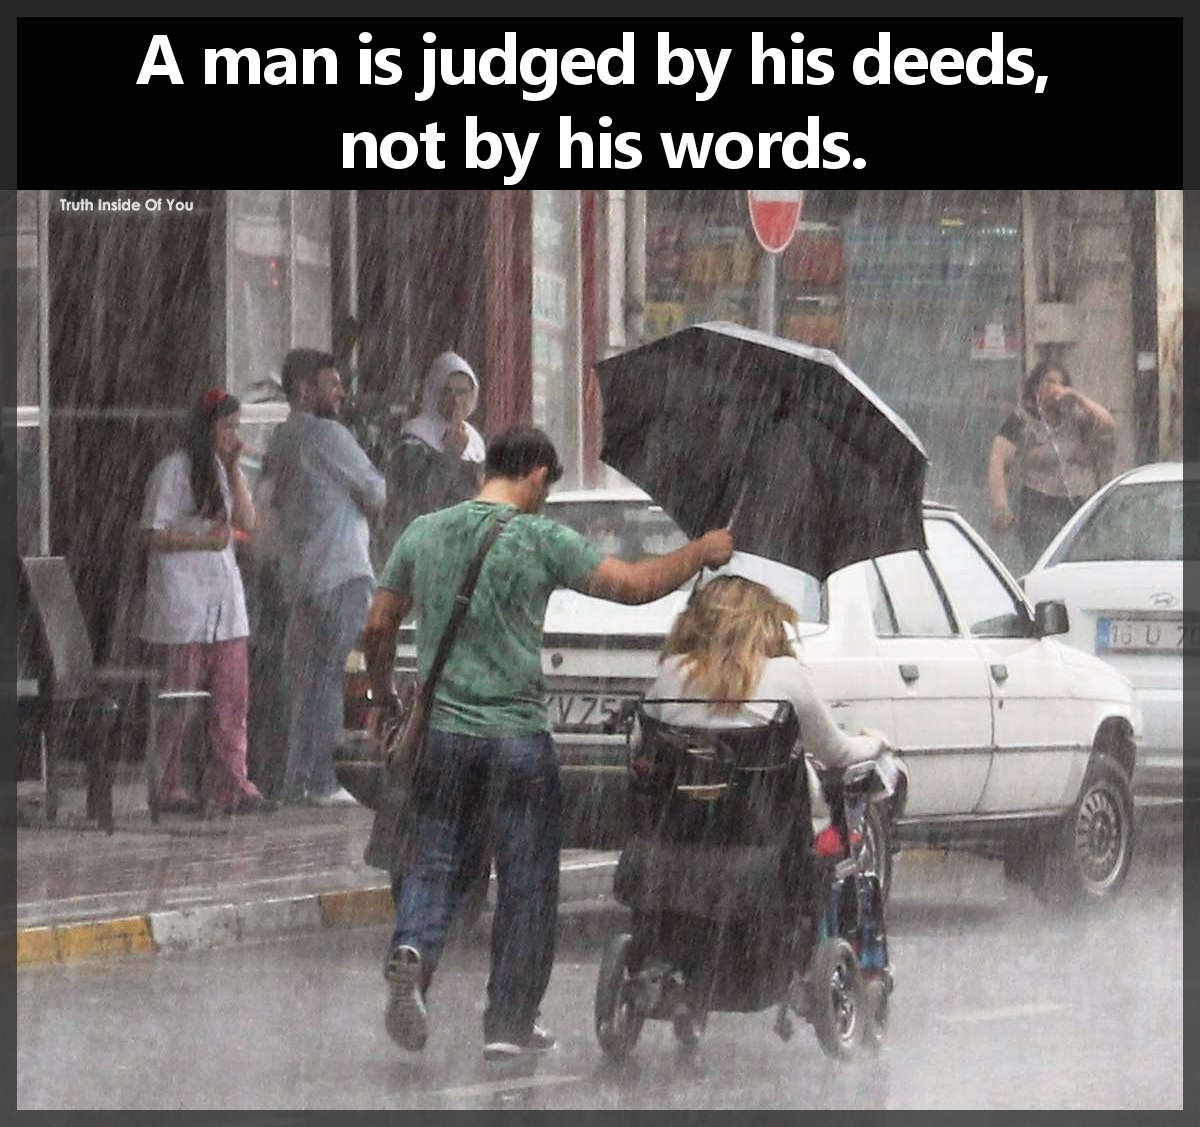 A man is judged by his deeds, not by his words.